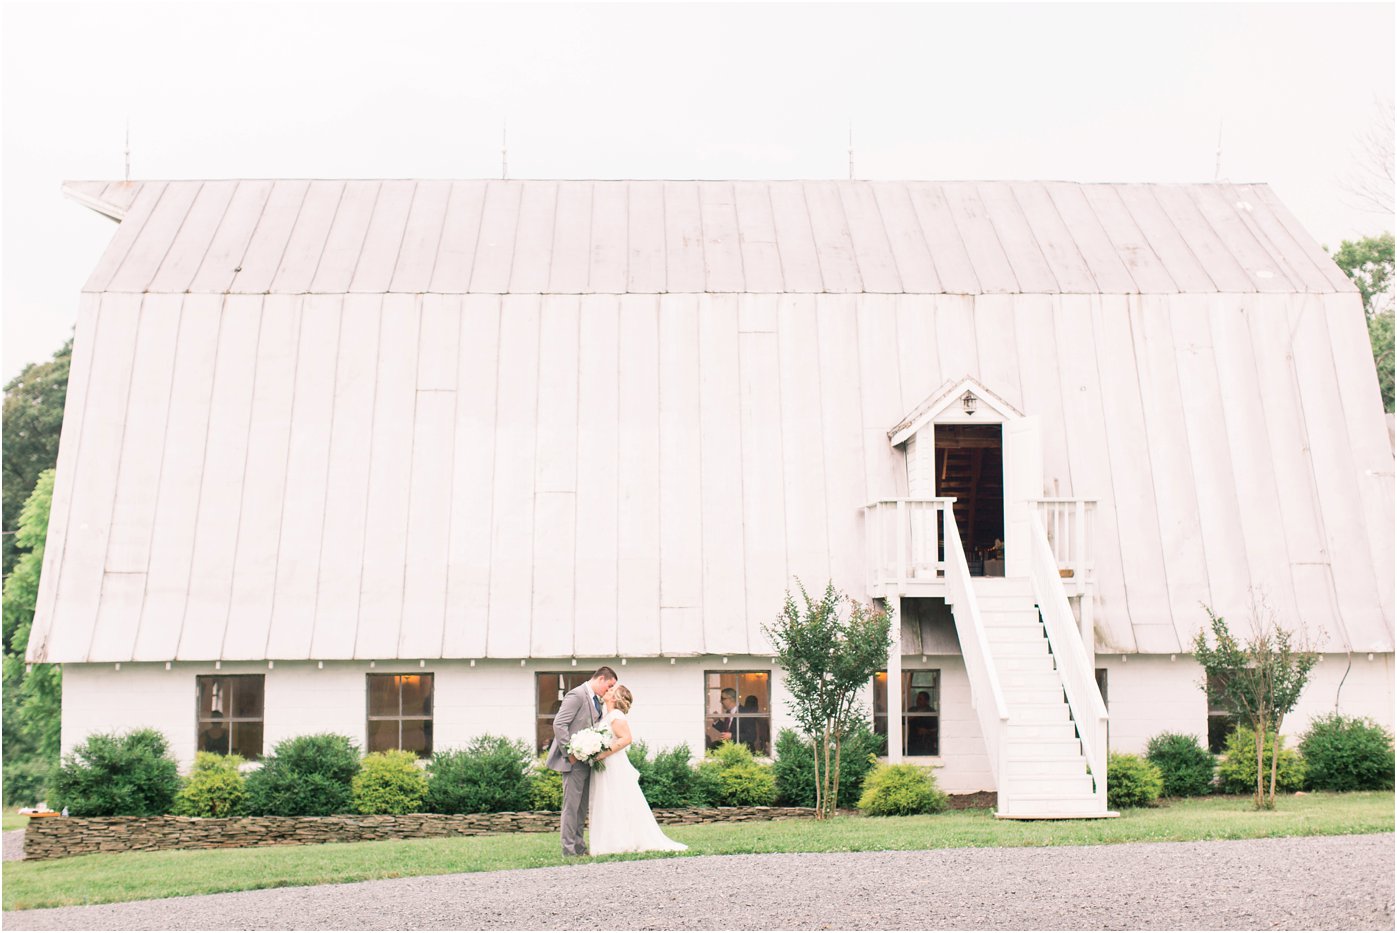 A bride and groom sharing a kiss in front of the 48 Fields Barn, a wedding venue in Leesburg, Virginia!